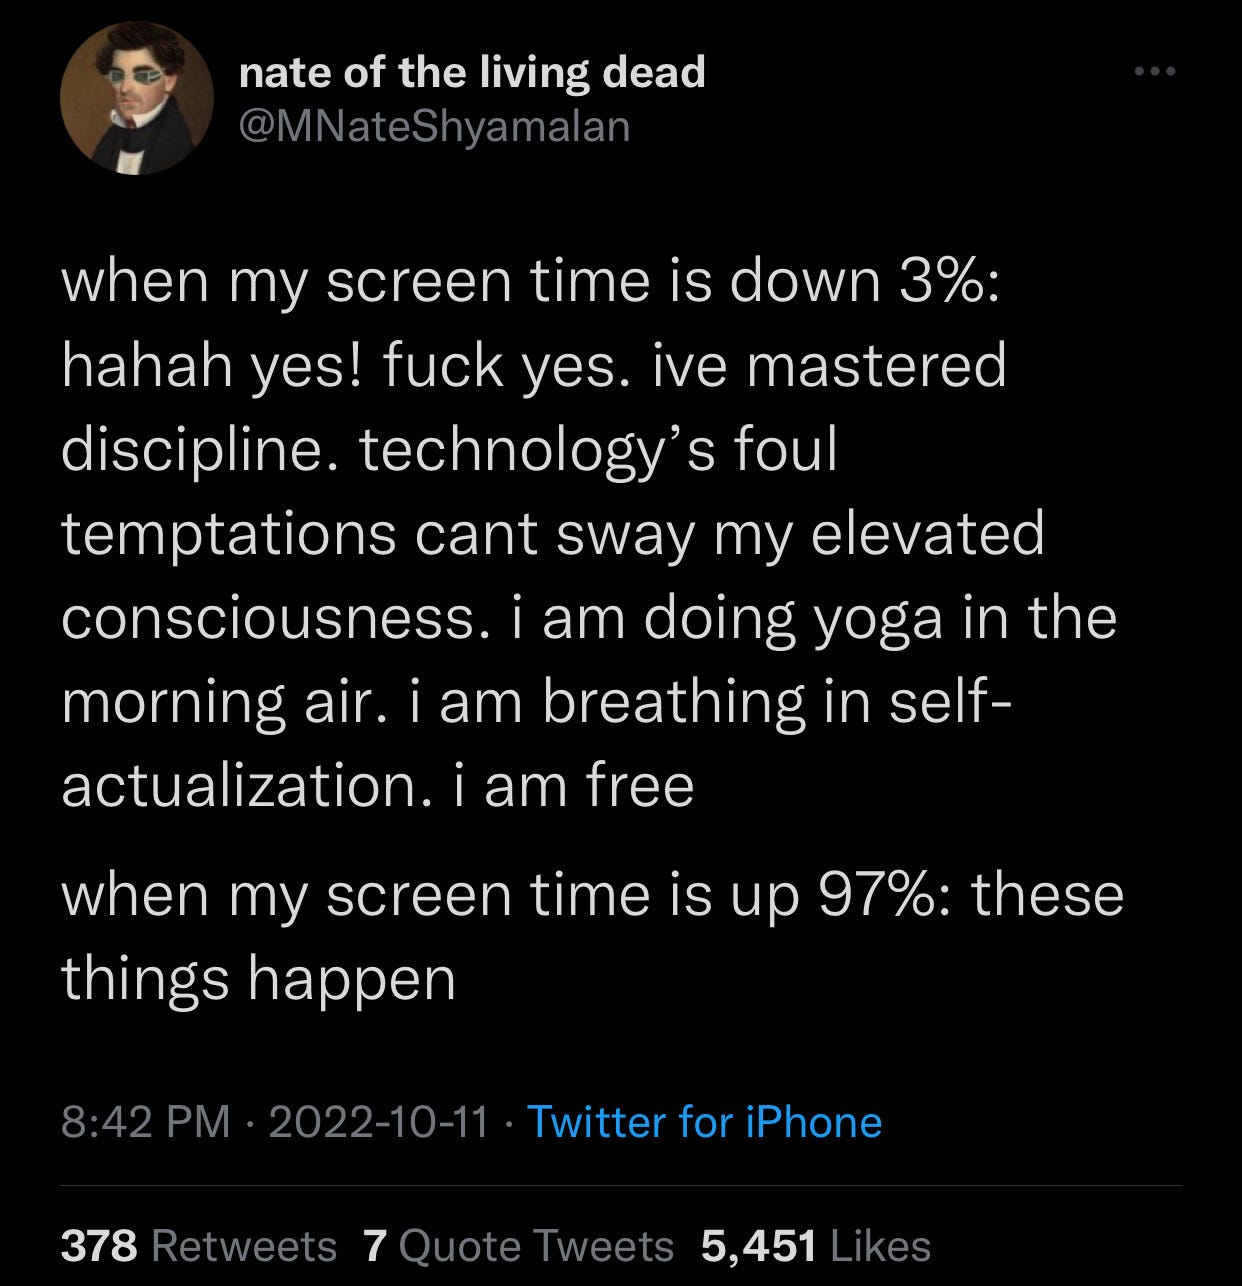 Tweet from twitter user @MNateshyamalan which reads: "when my screen time is down 3%: haha yes! fuck yes. ive mastered discipline. technology’s foul temptations cant sway my elevated consciousness. i am doing yoga in the morning air. i am breathing in self-actualization. i am free. when my screen time is up 97%: these things happen"